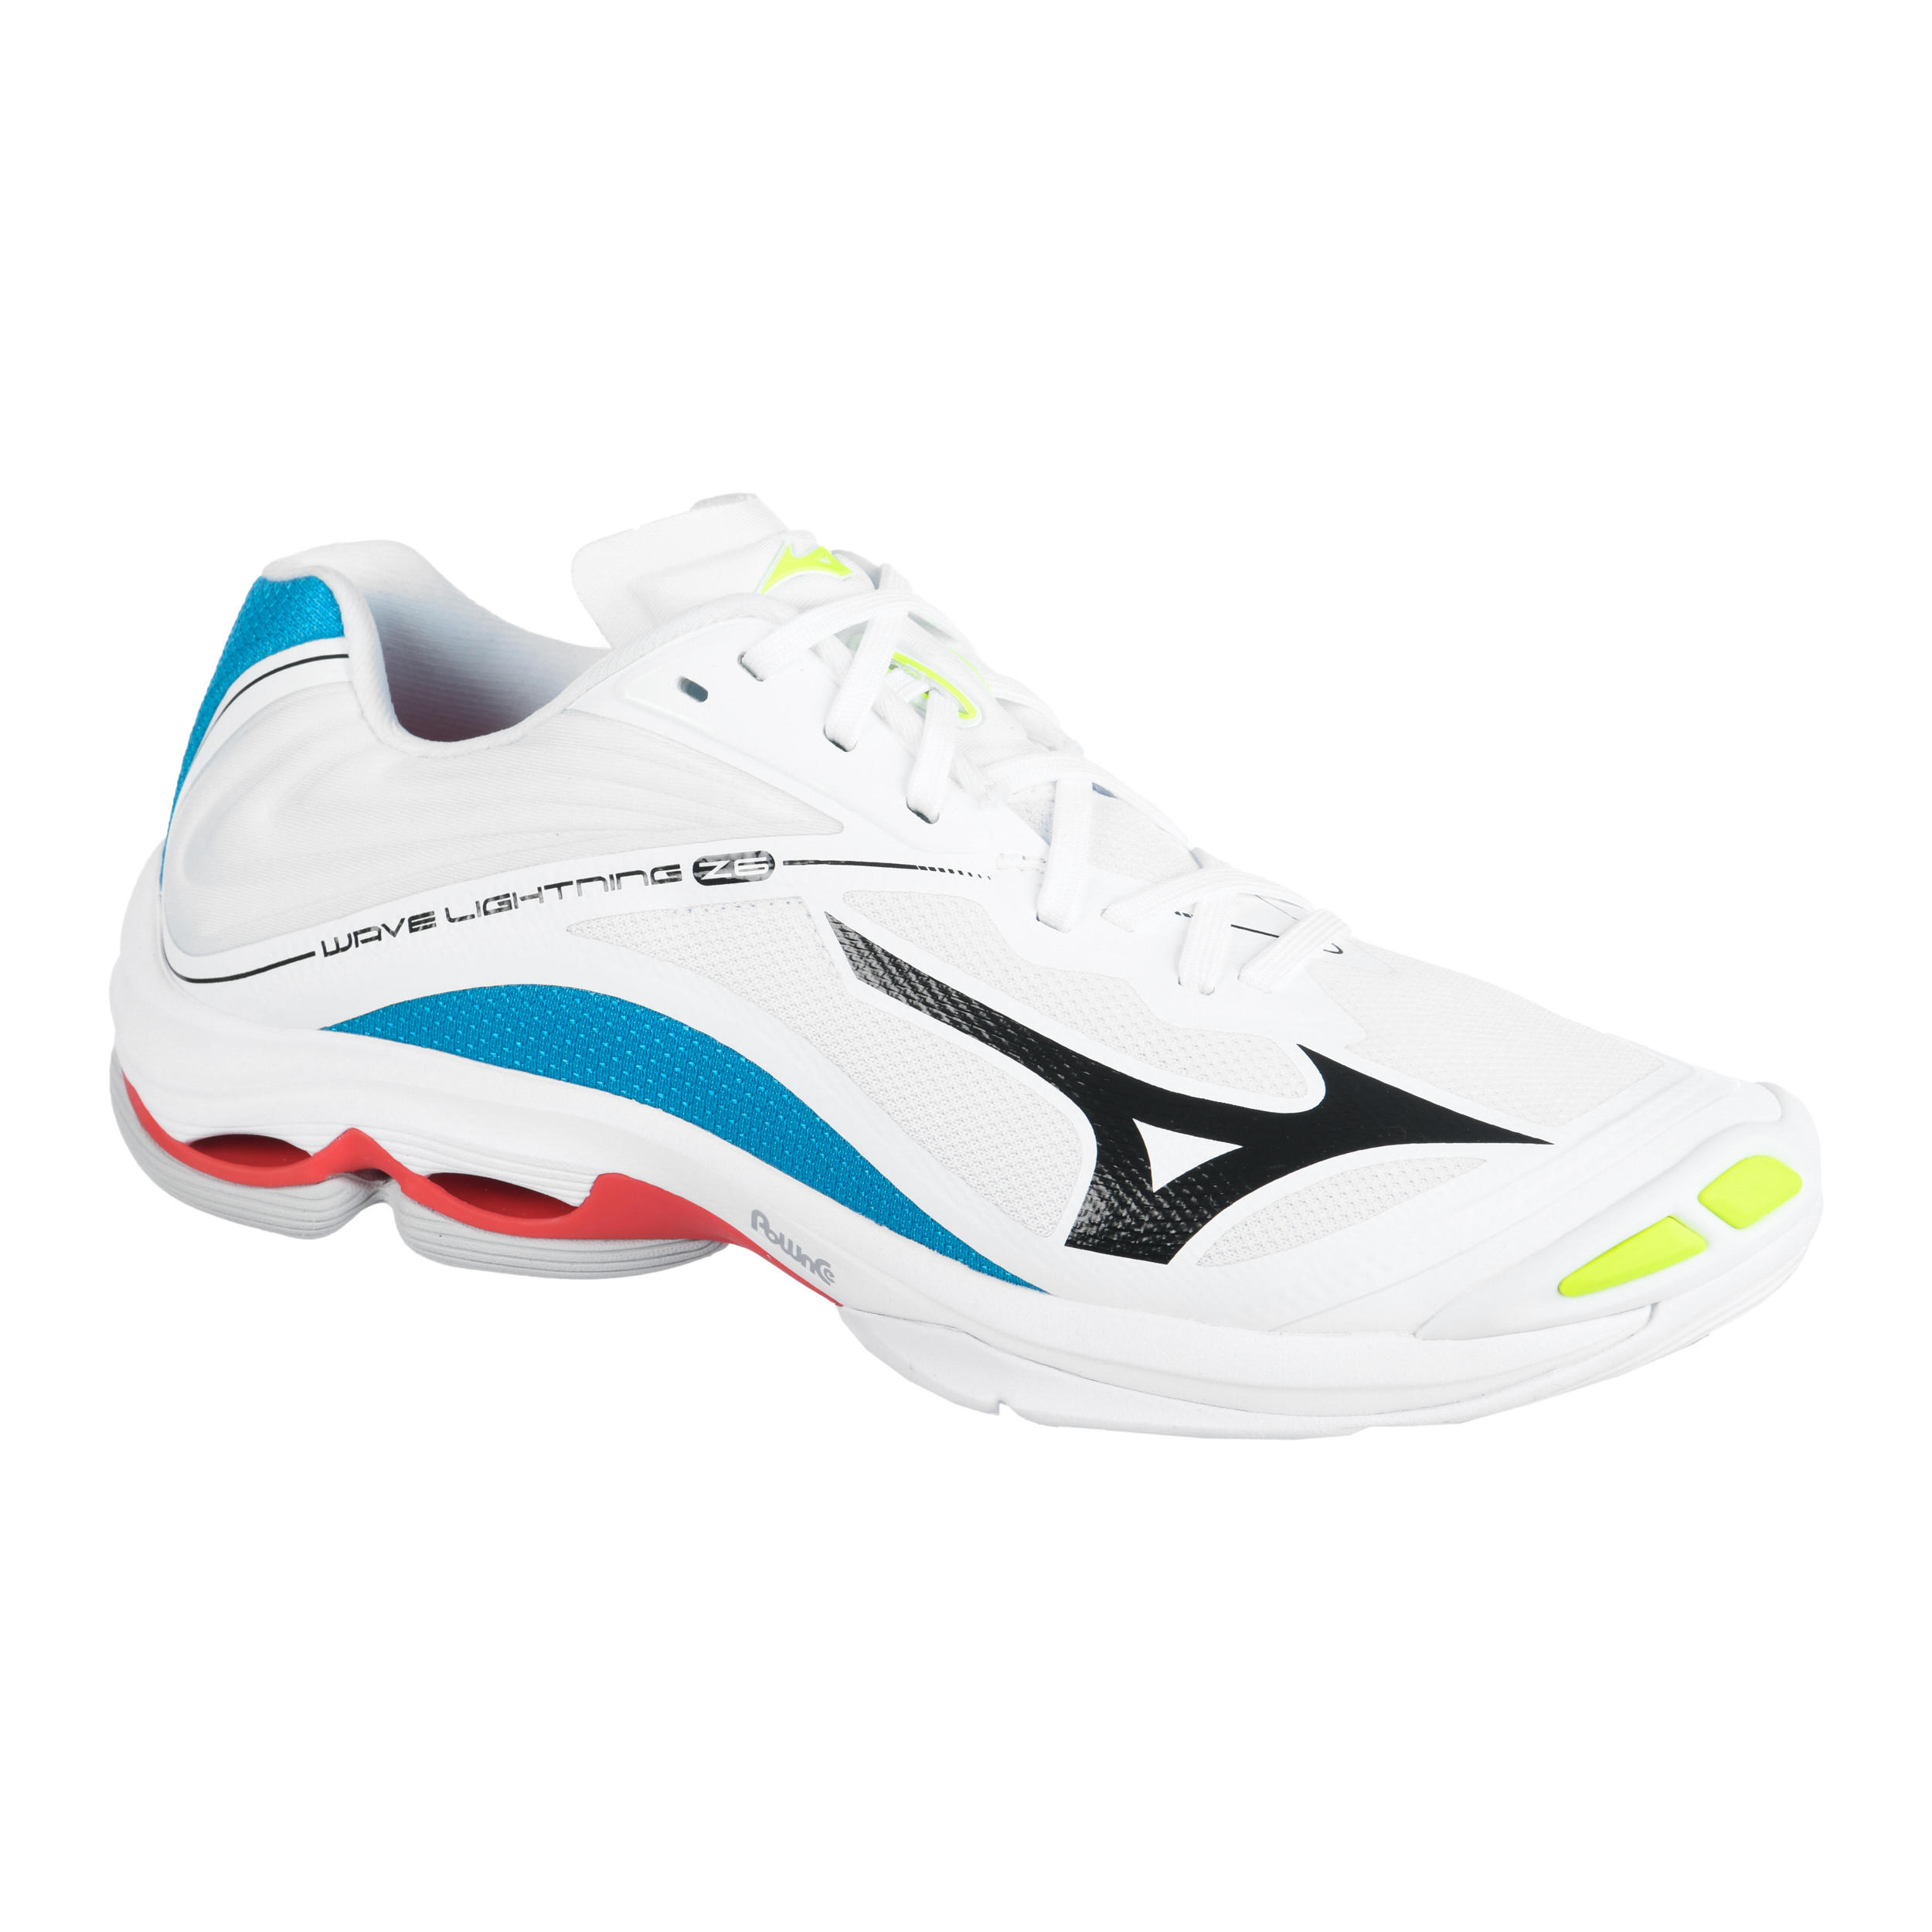 all mizuno volleyball shoes